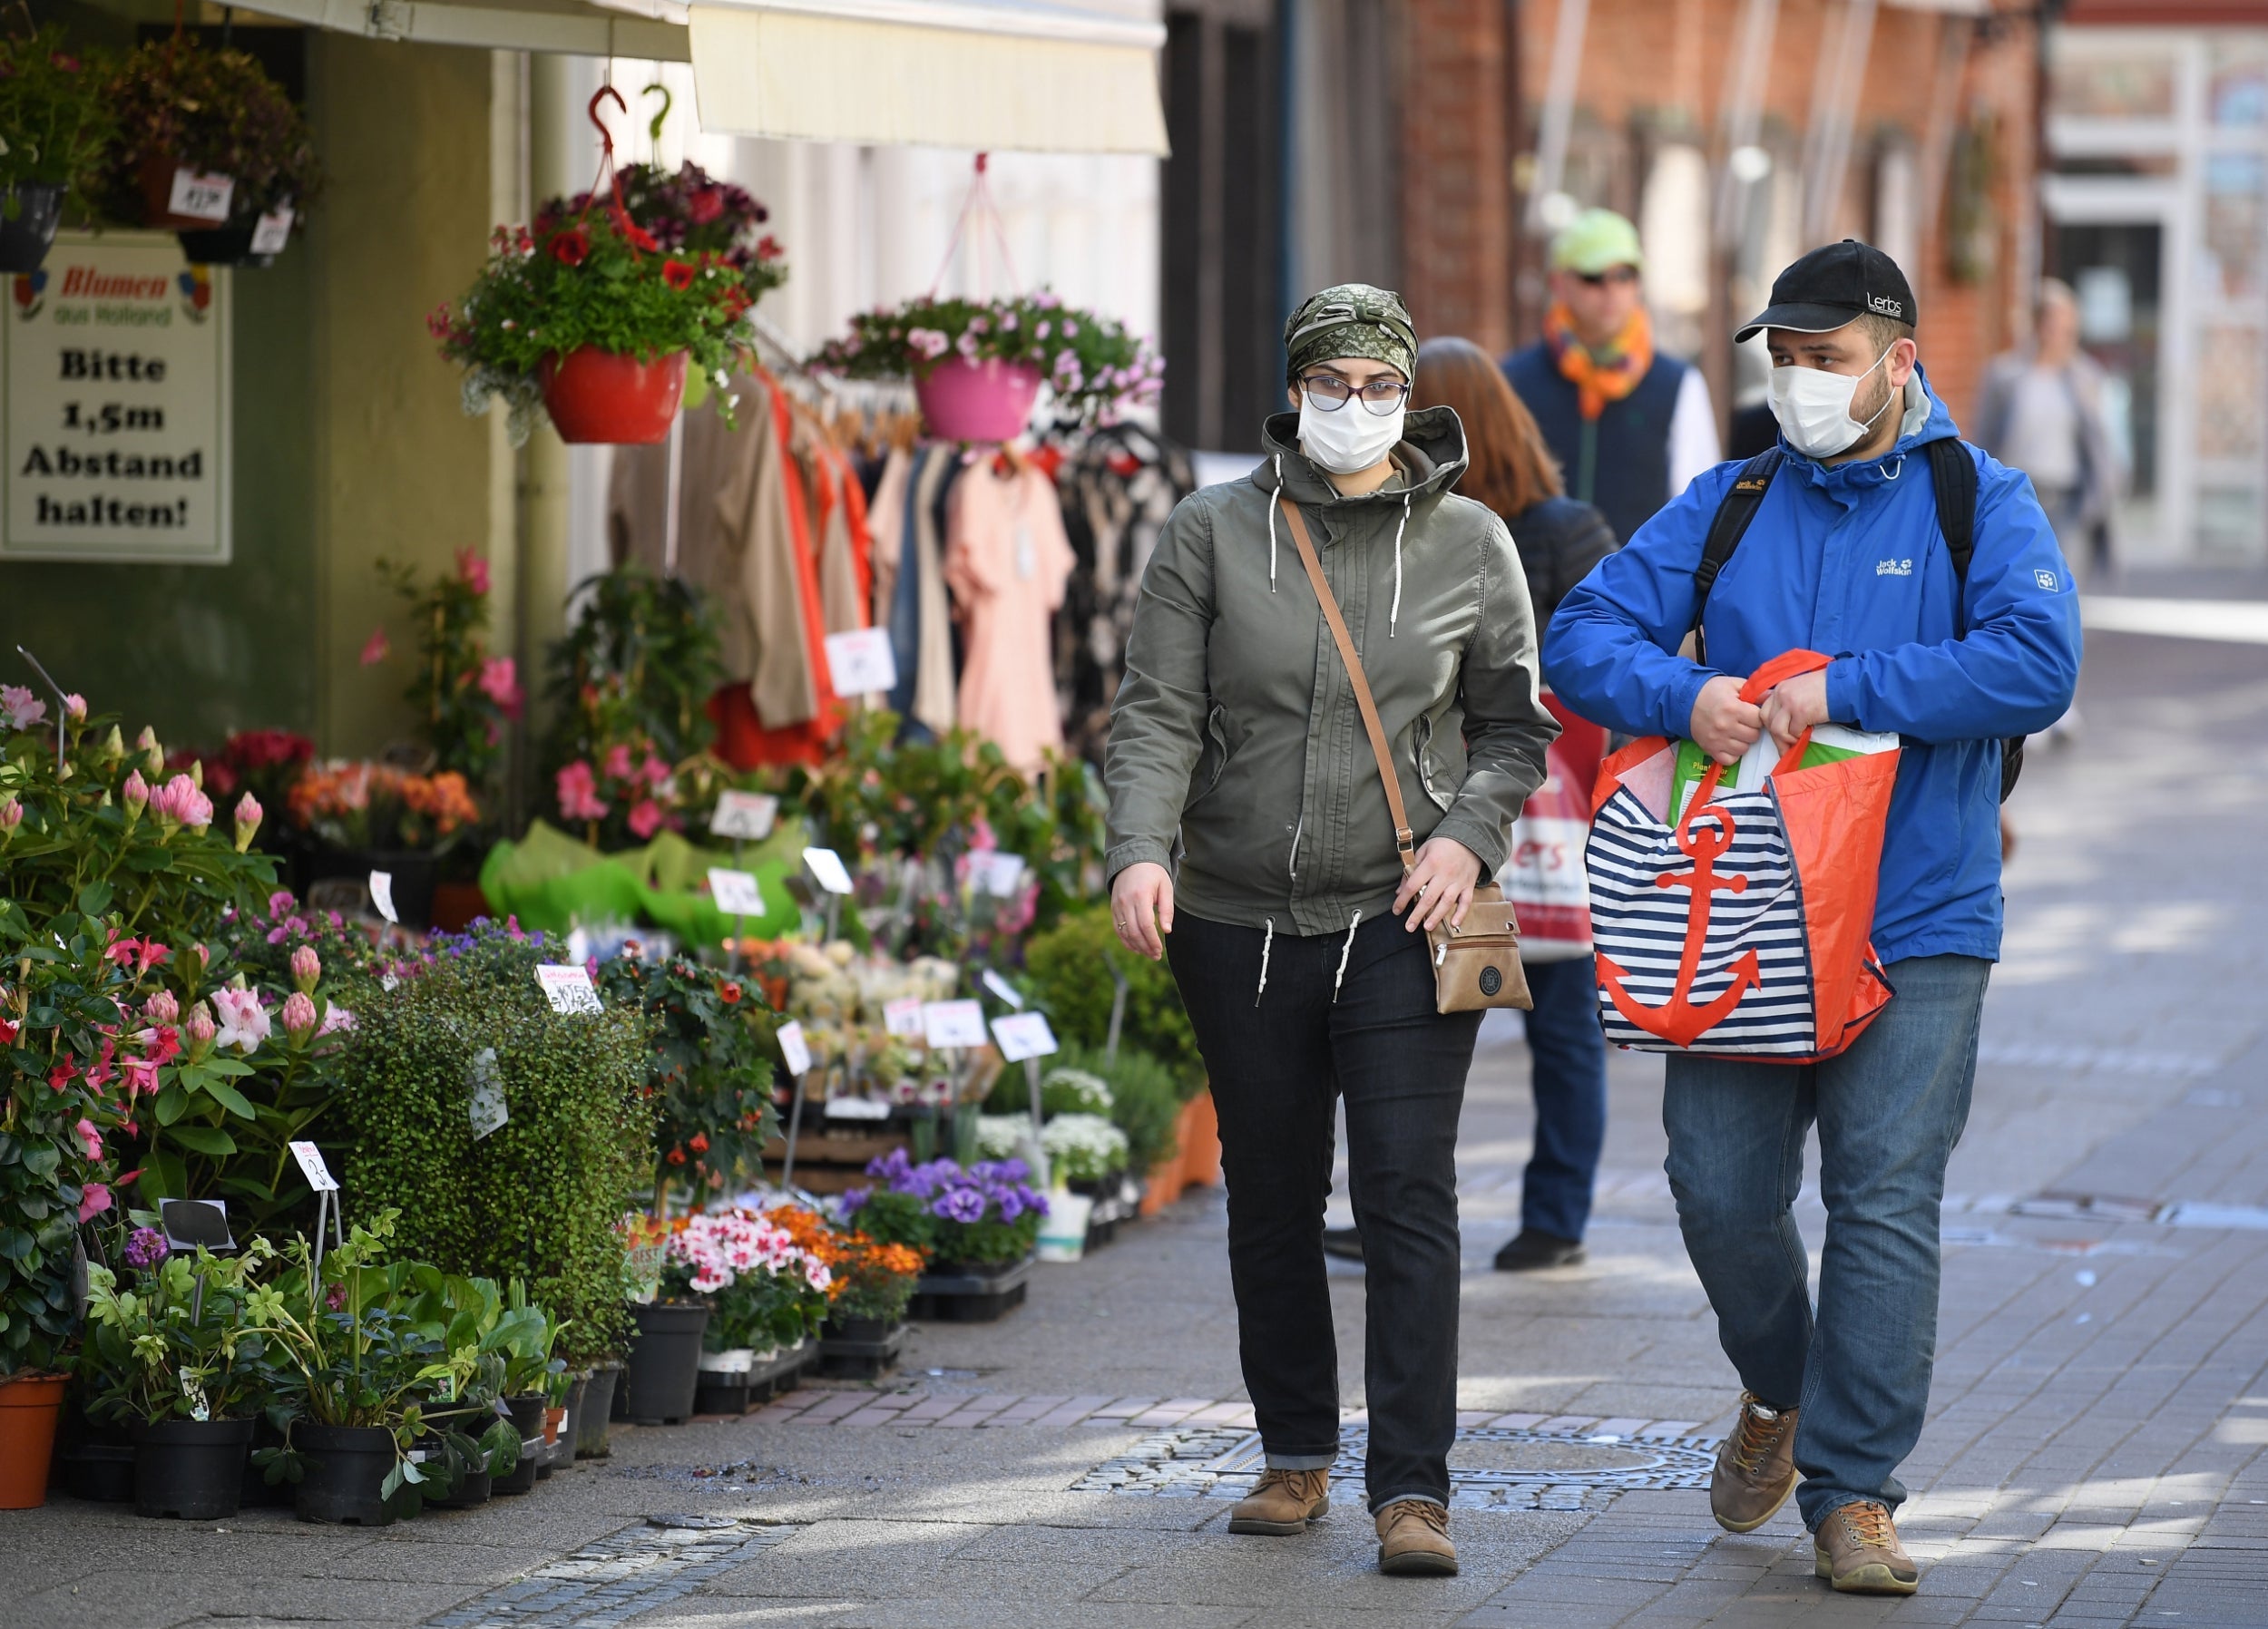 A couple walk past a florist on the first day of the easing of some restrictions in Lueneburg, Germany